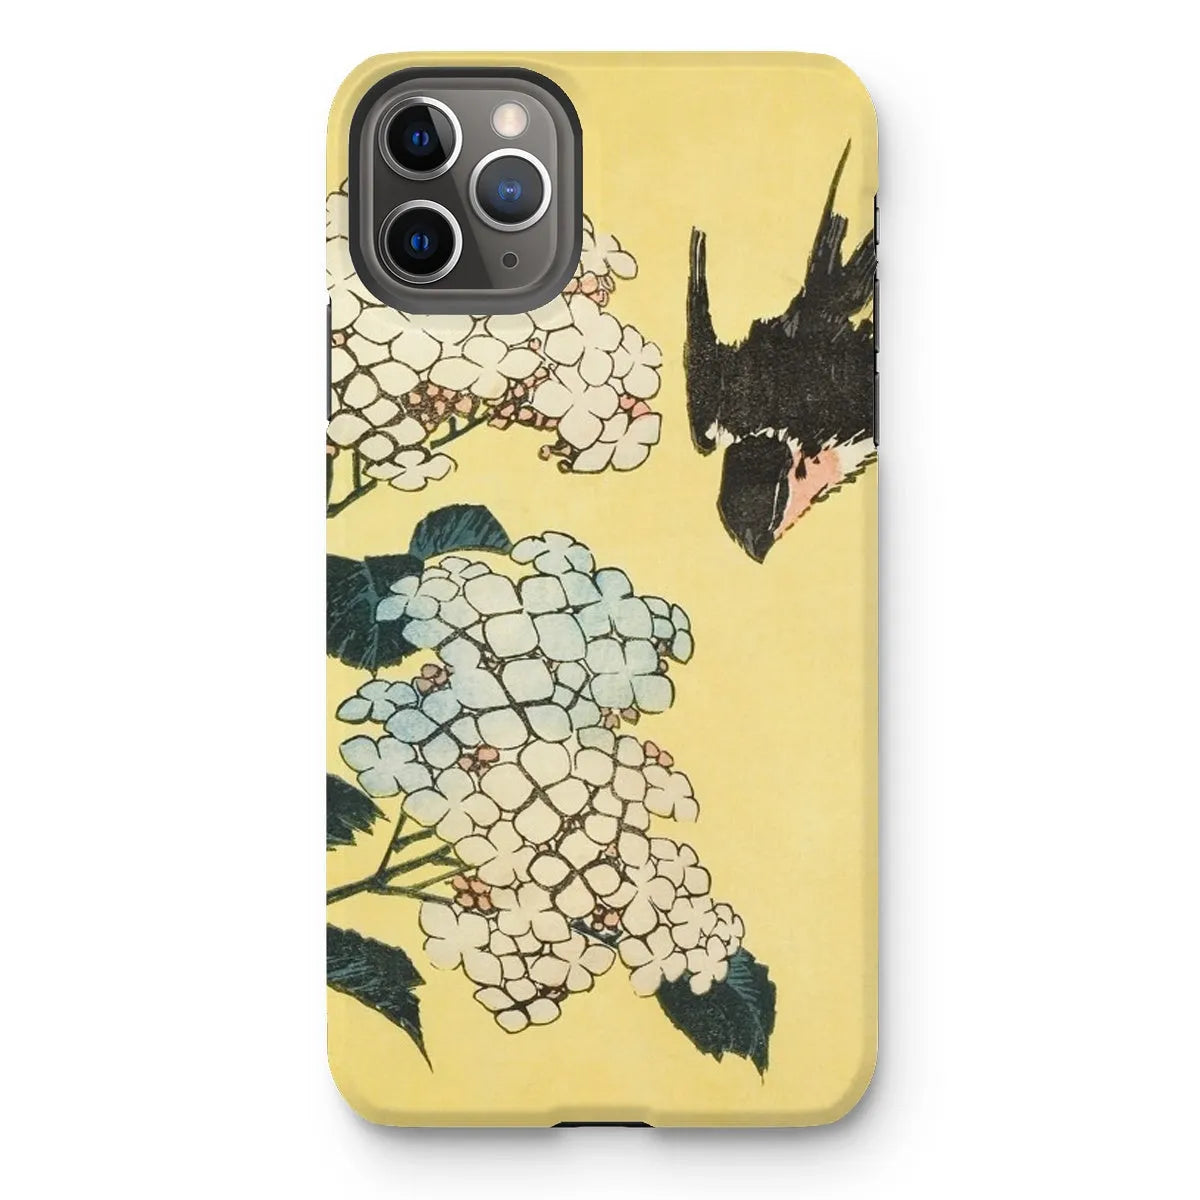 Hydrangea And Swallow - Japanese Art Phone Case - Hokusai - Iphone 11 Pro Max / Matte - Mobile Phone Cases - Aesthetic